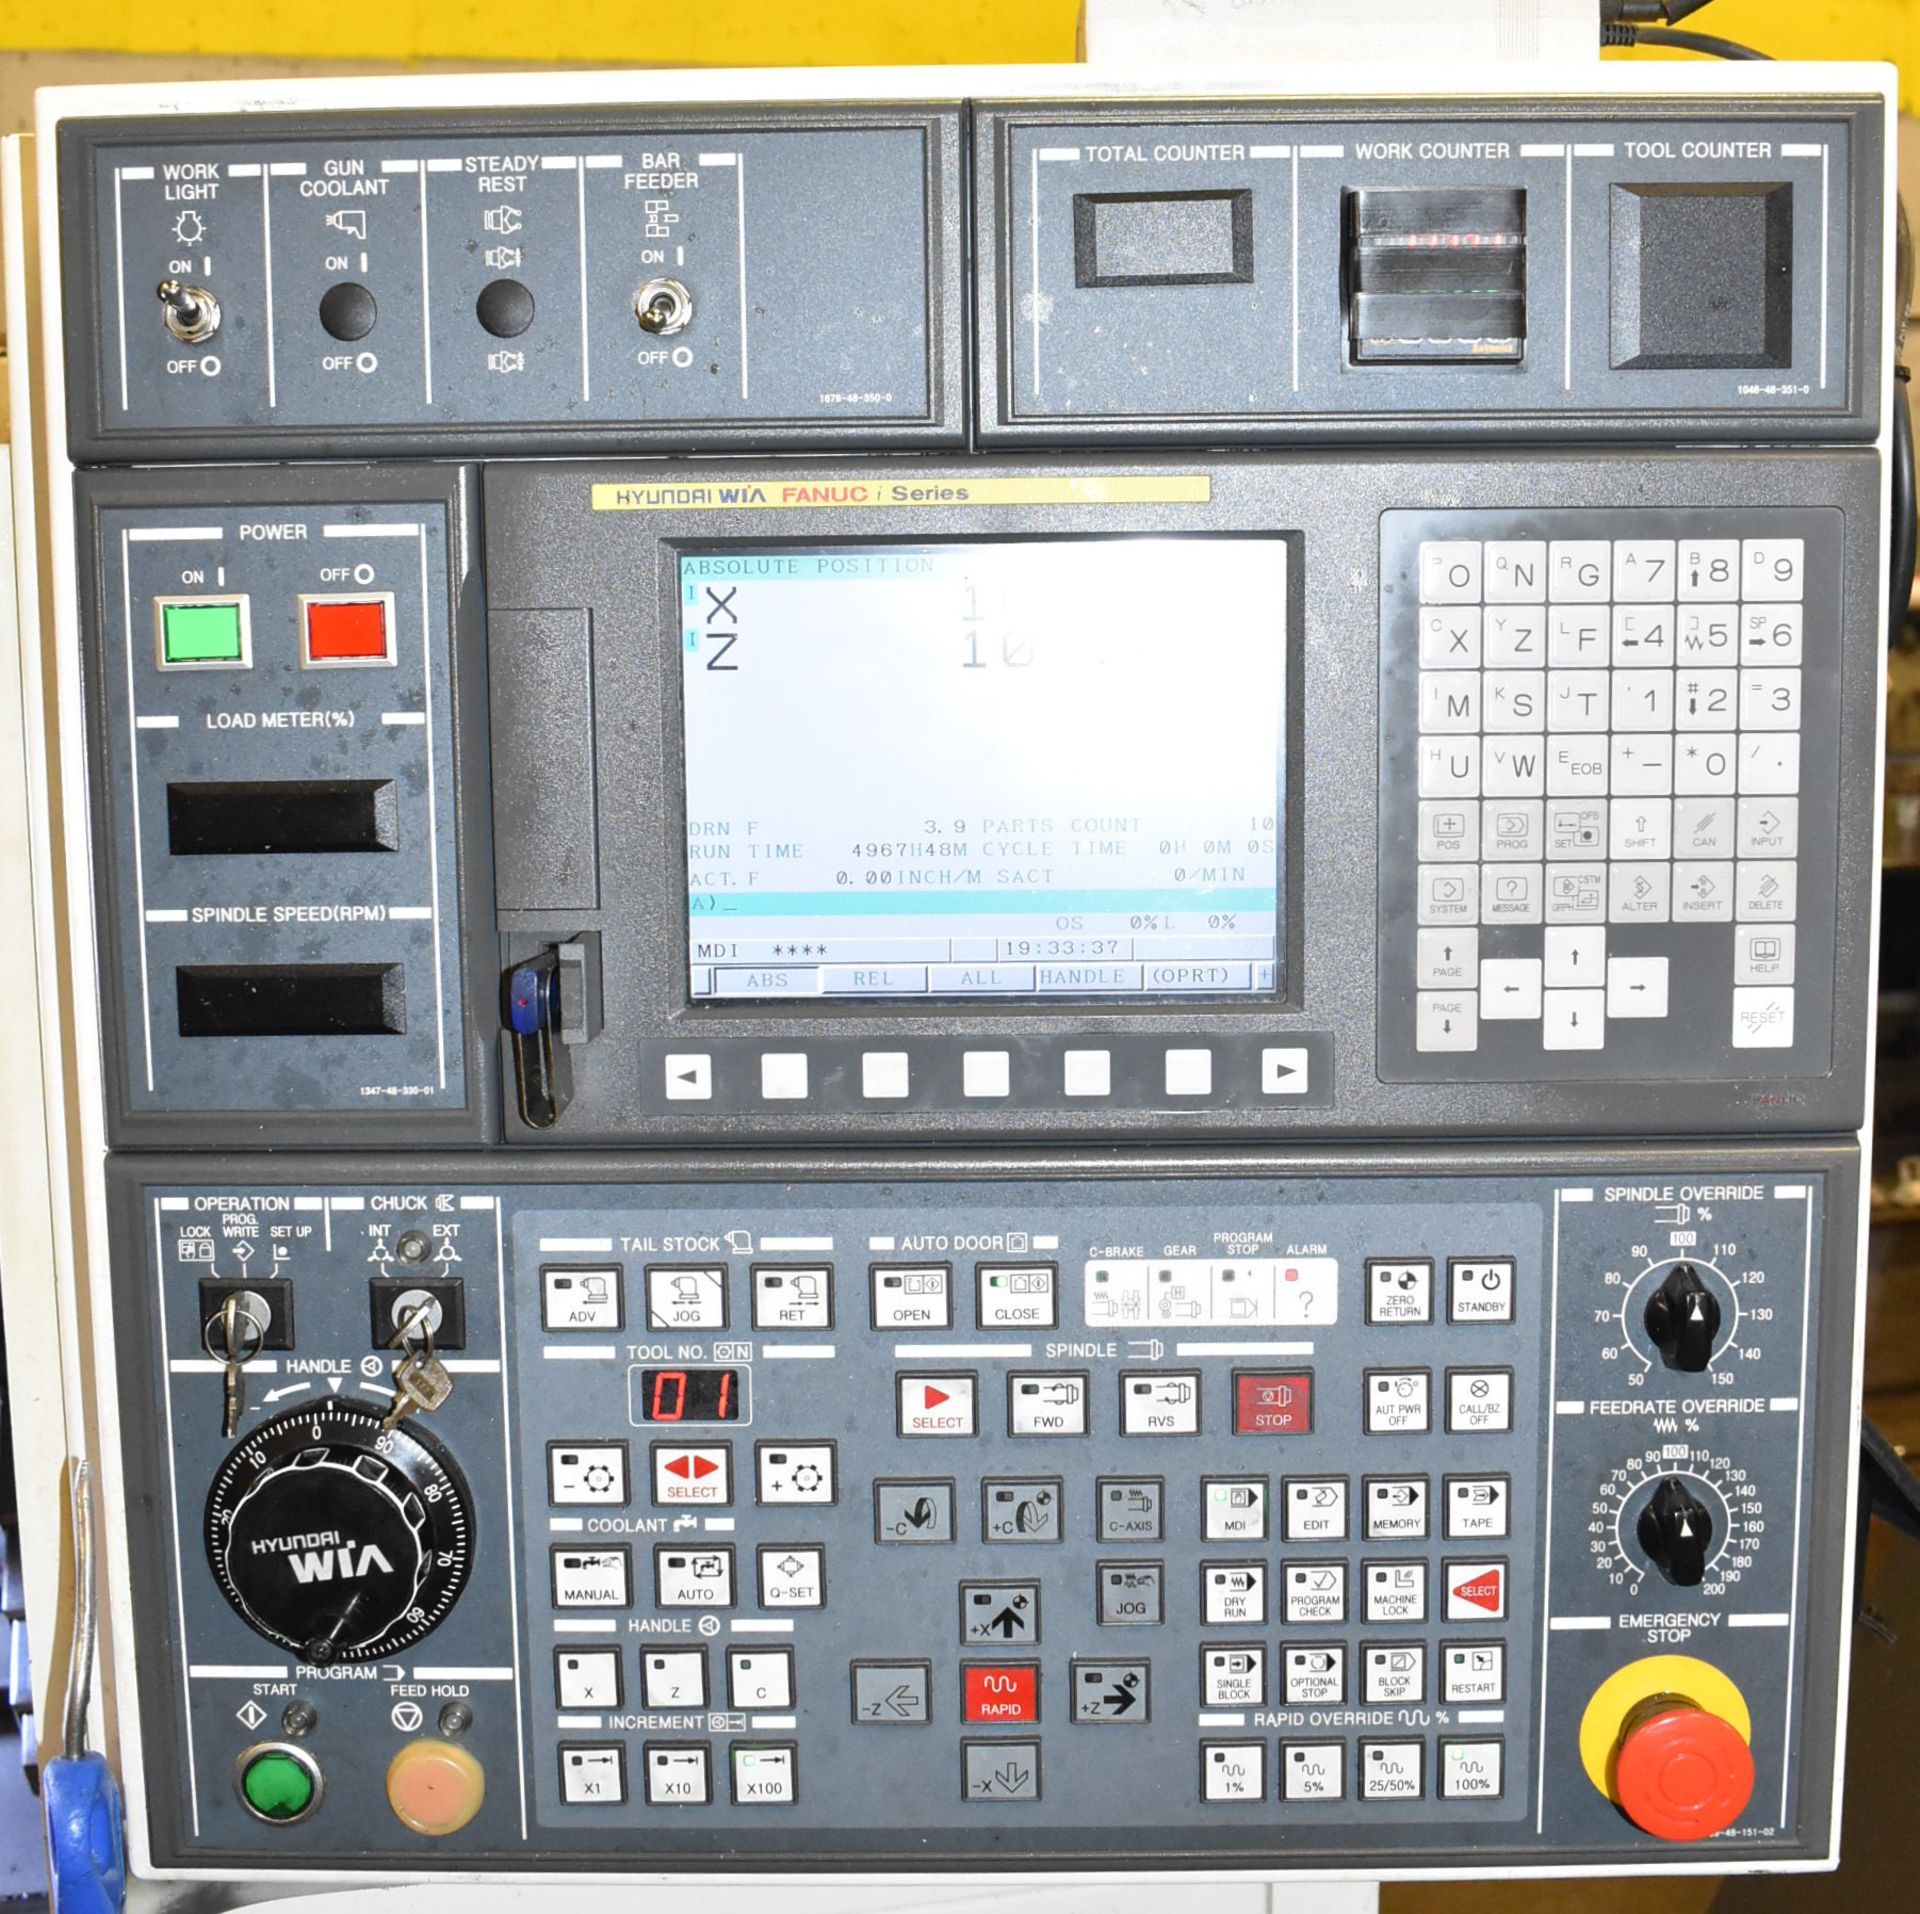 HYUNDAI WIA (2015) E160A CNC TURNING CENTER WITH FANUC I SERIES CNC CONTROL, HYDRAULIC COLLET CHUCK, - Image 3 of 10